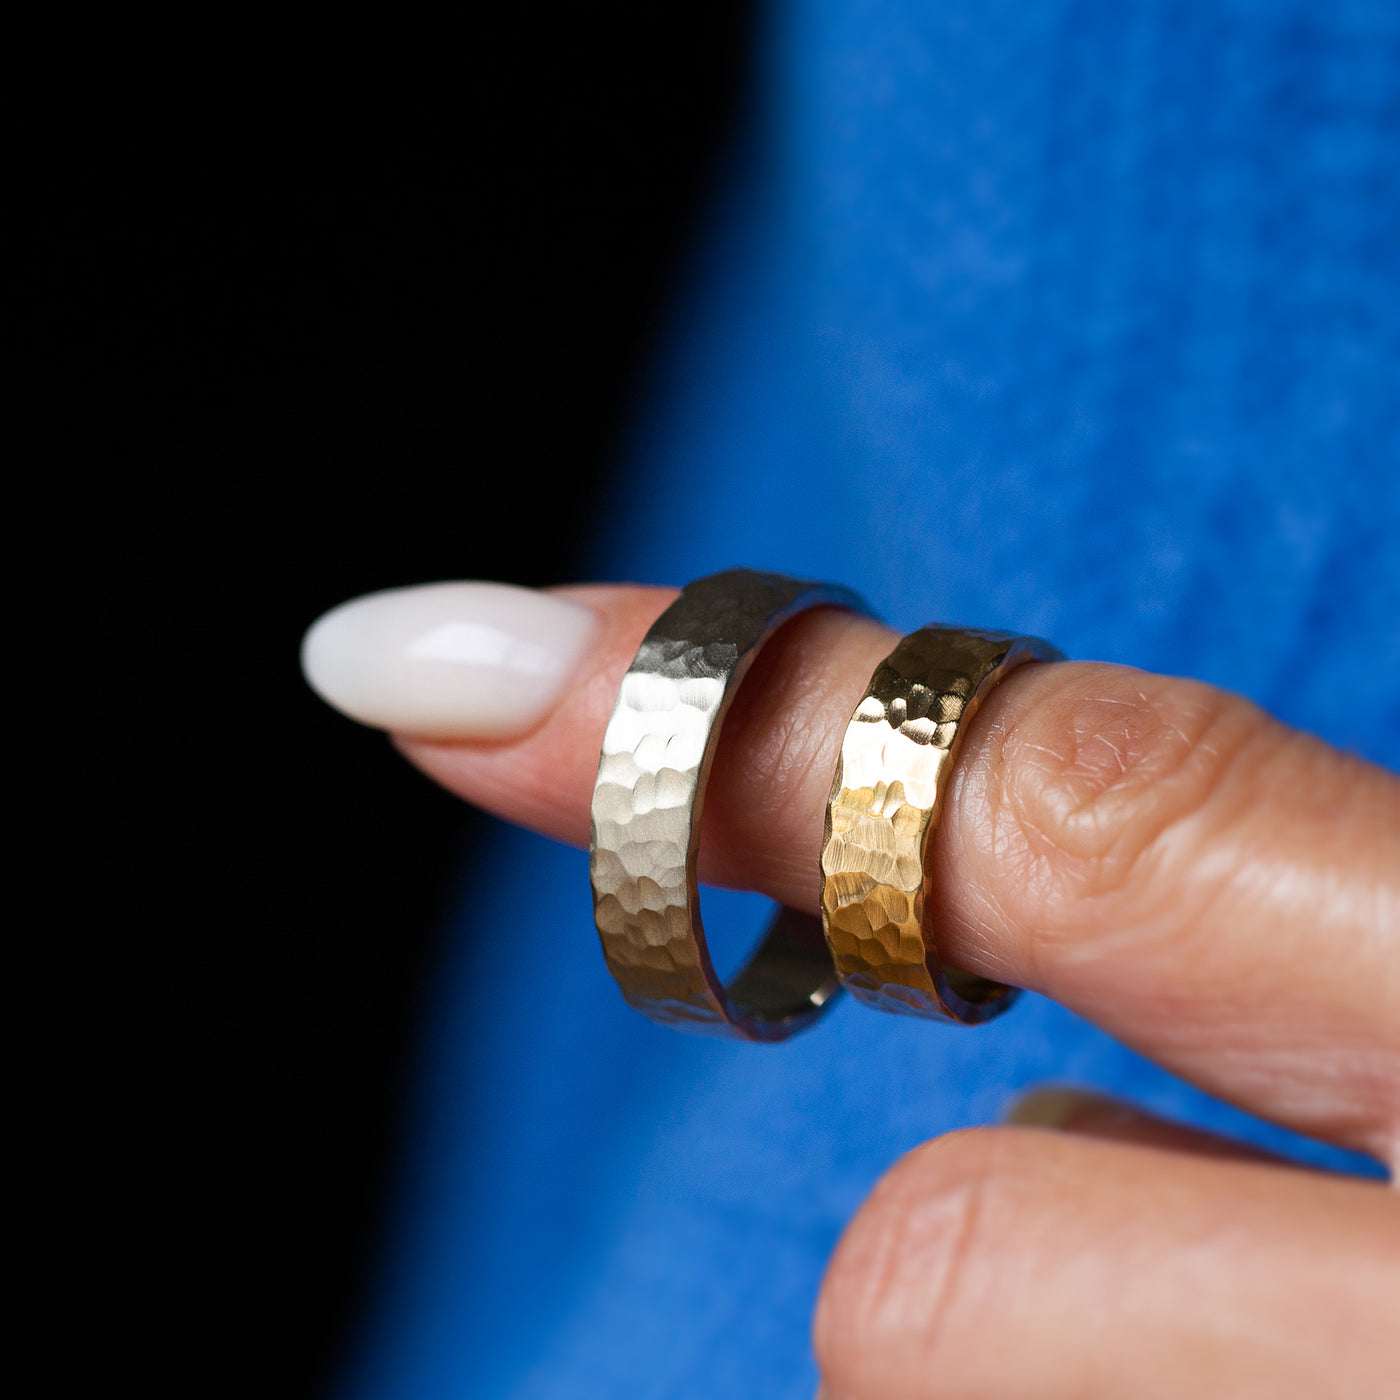 Timber | 6mm Hammered Gold Ring